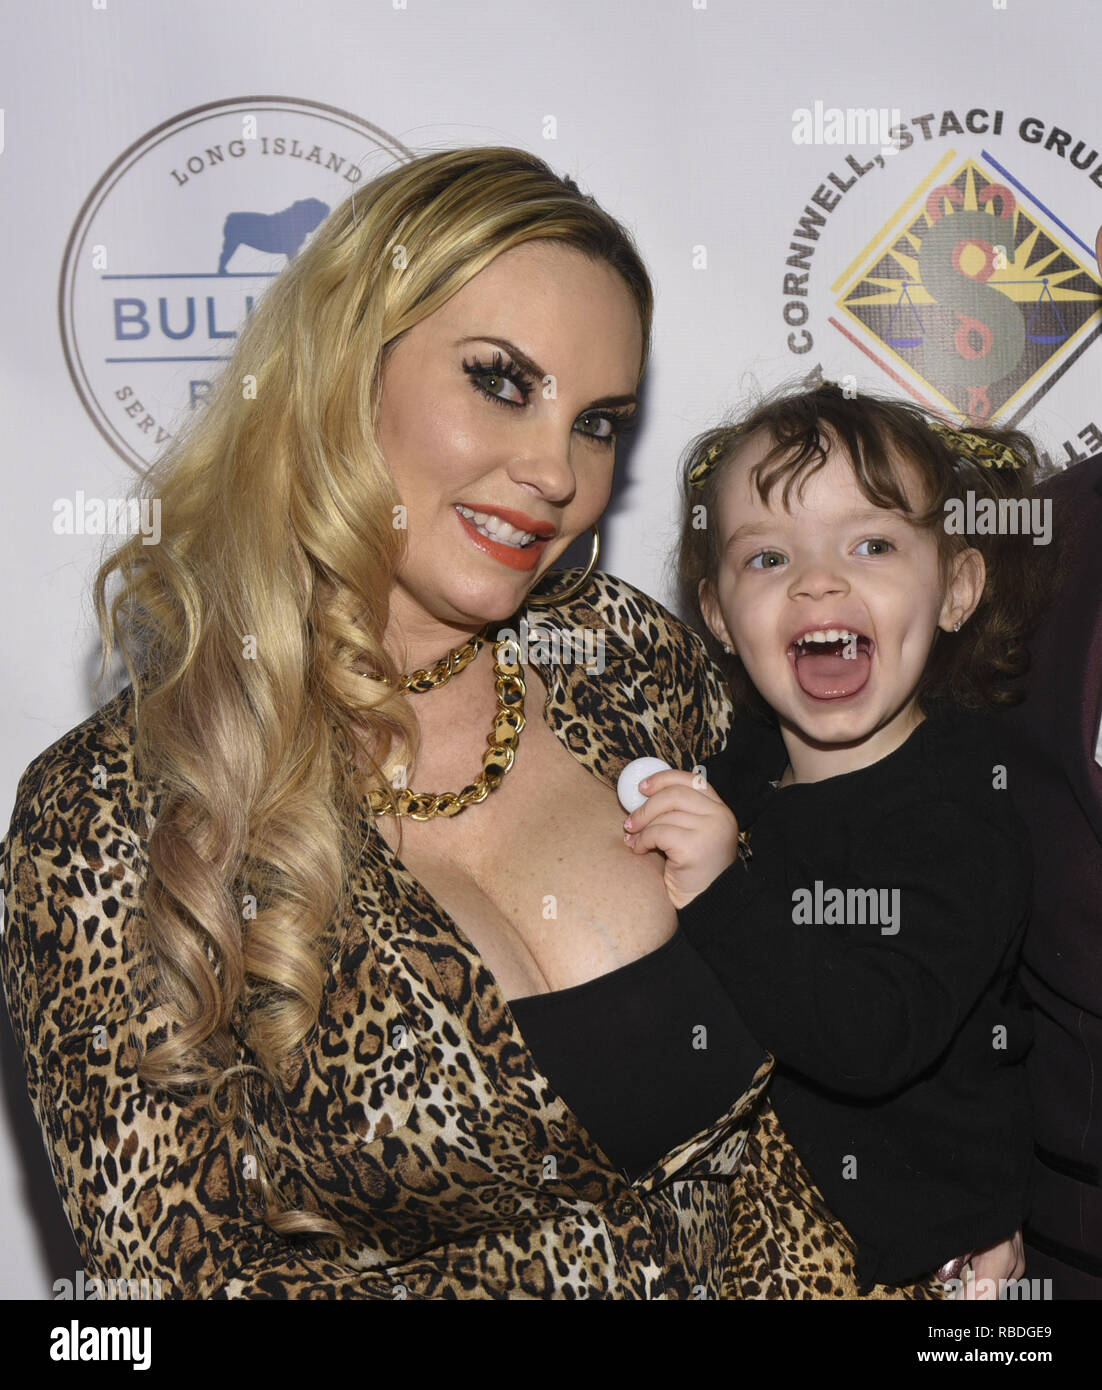 Ice-T's wife Coco Austin and their daughter Chanel attend 'Bash for the  Bulldogs' Benefit for Long Island Bulldog Rescue held at Kimmel Center NYU,  Rosenthal Pavilion Featuring: Coco Austin, Chanel Nicole Marrow